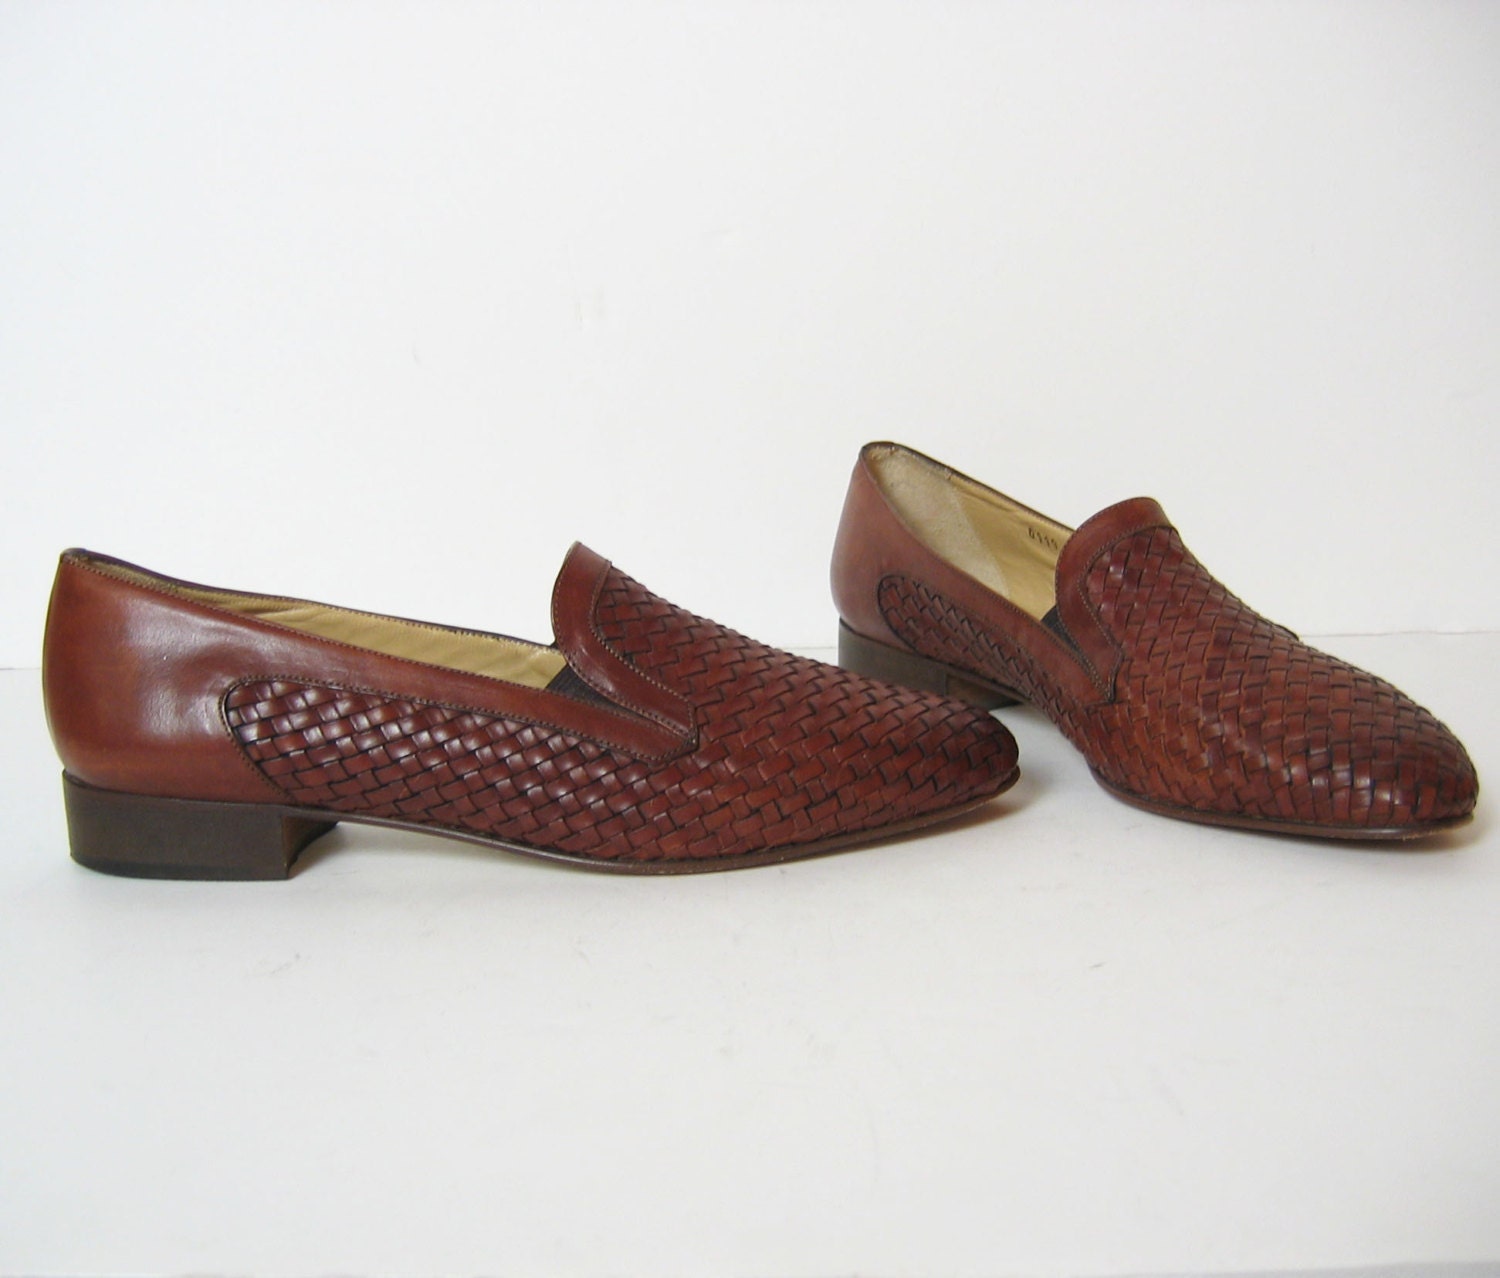 ITALIAN WOVEN LEATHER loafers 9 10 by TheLovedOne on Etsy